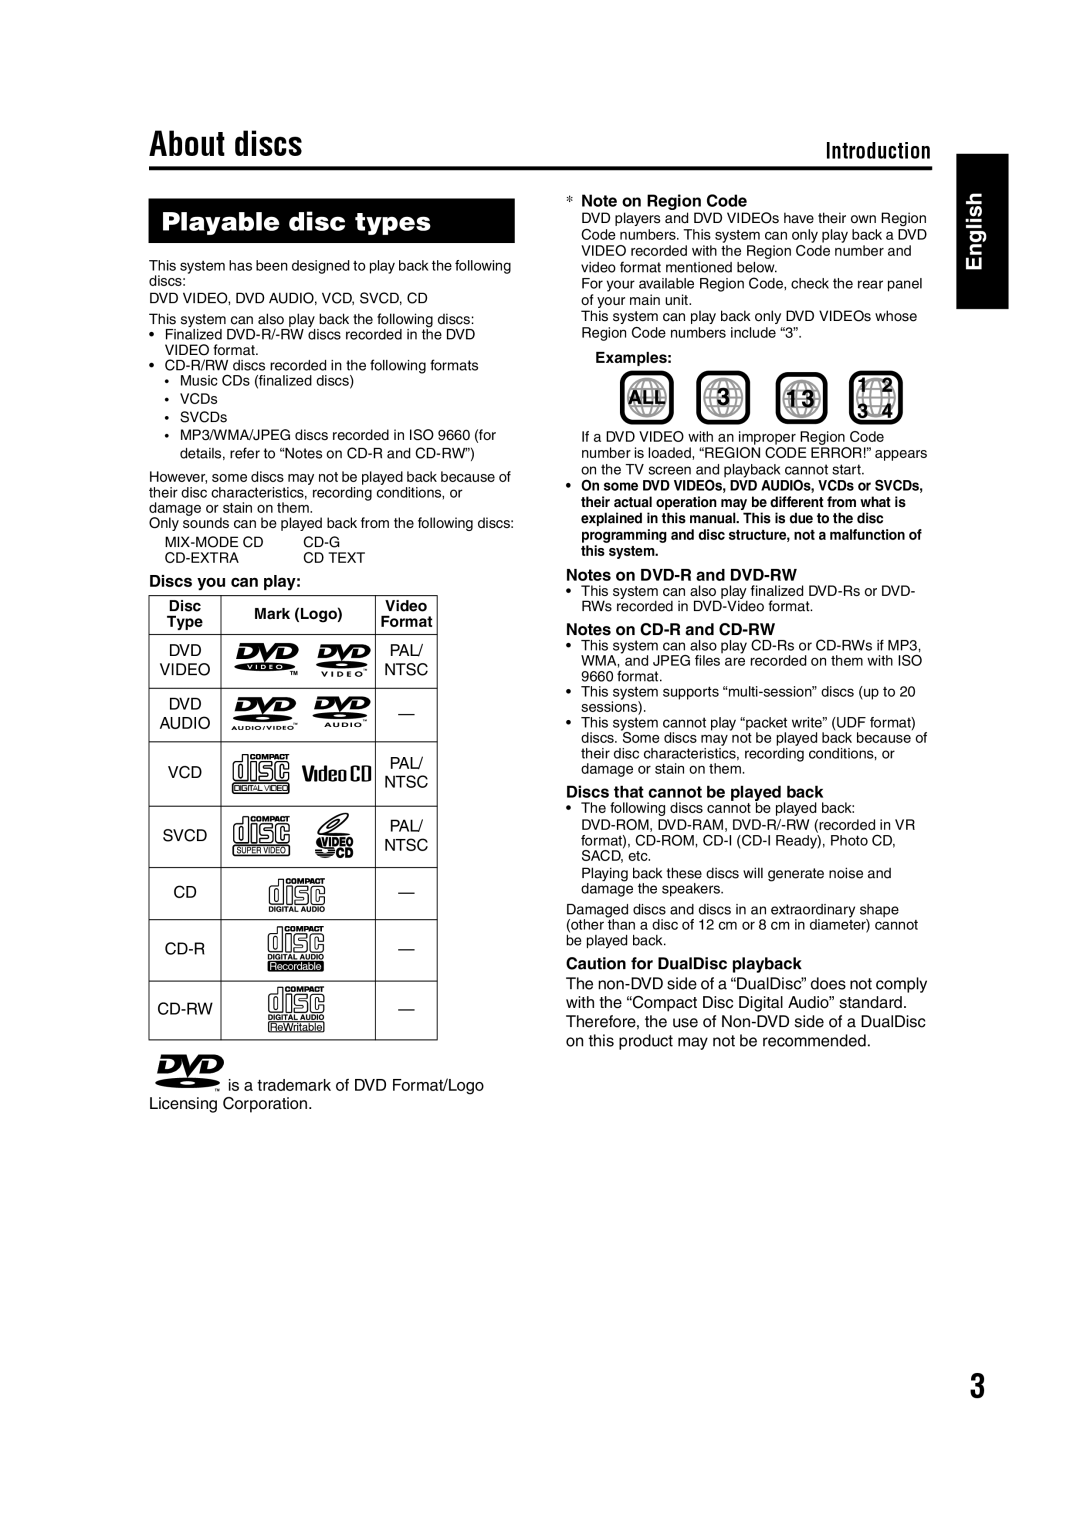 JVC GVT0144-005A manual About discs, Playable disc types, English, Introduction, Dvd Video, Dvd Audio, Vcd, Svcd, Cd 